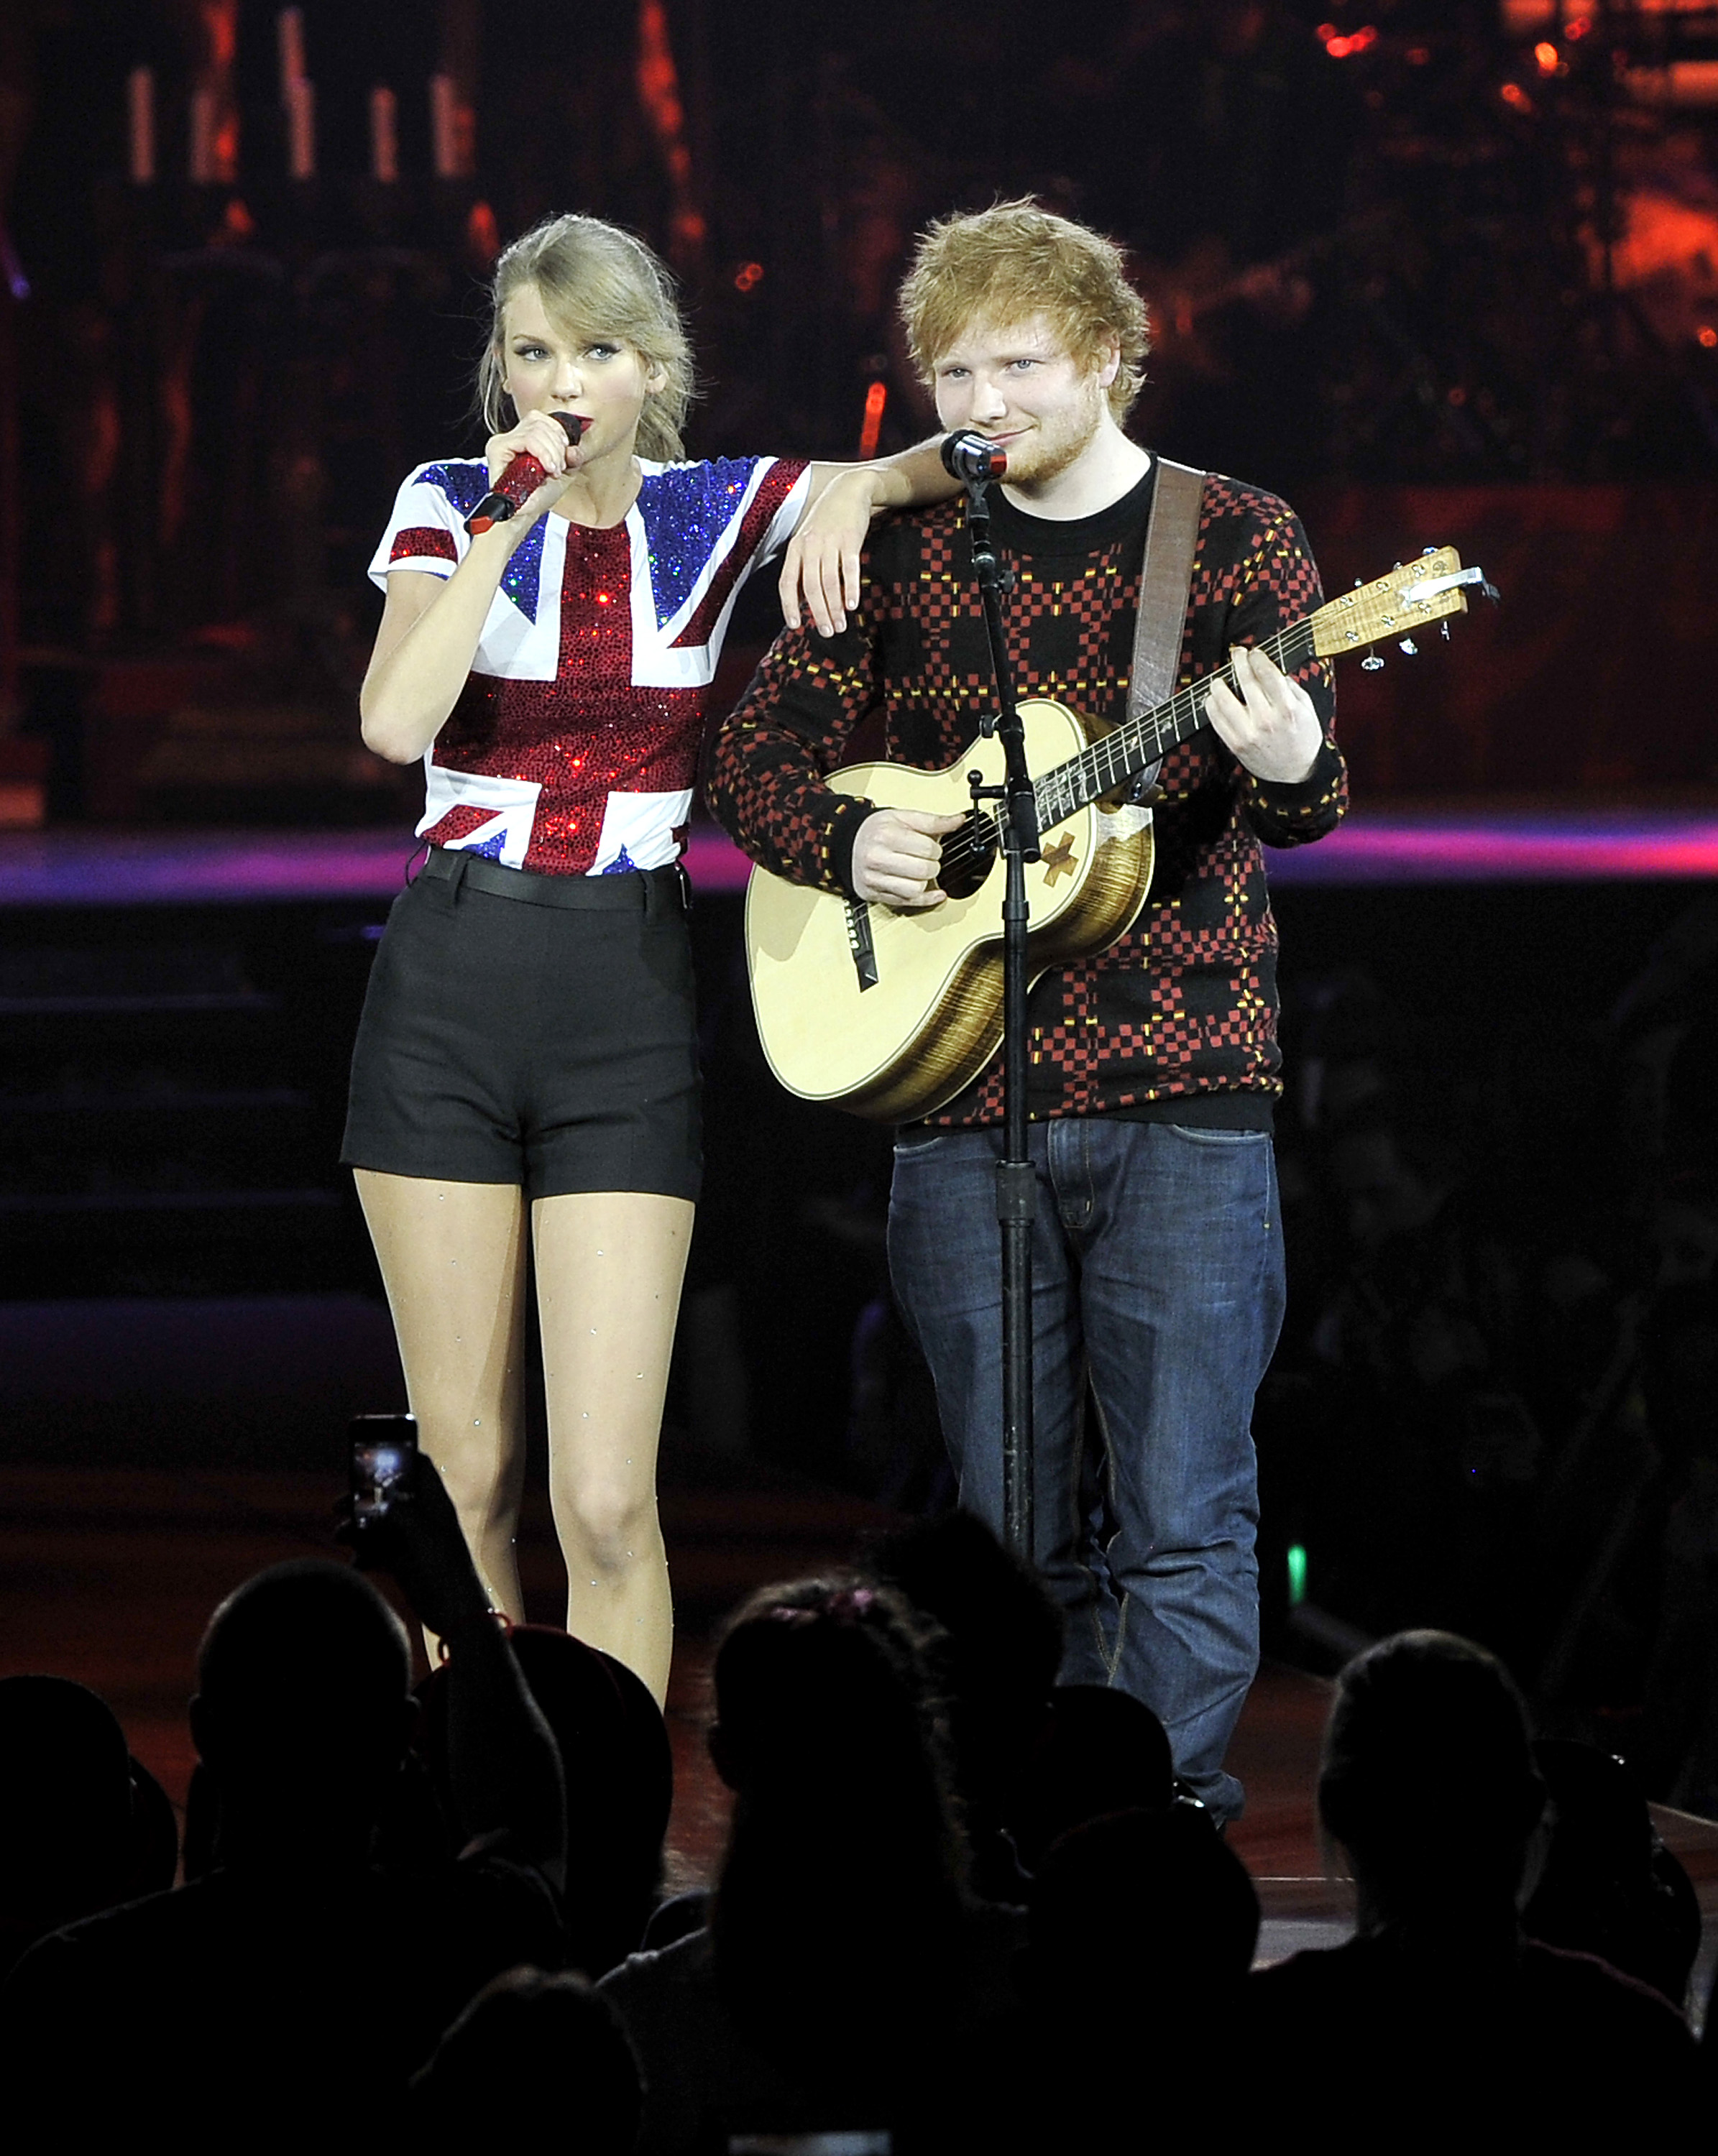 Taylor Swift's RED Tour - London, England - 2/1/14